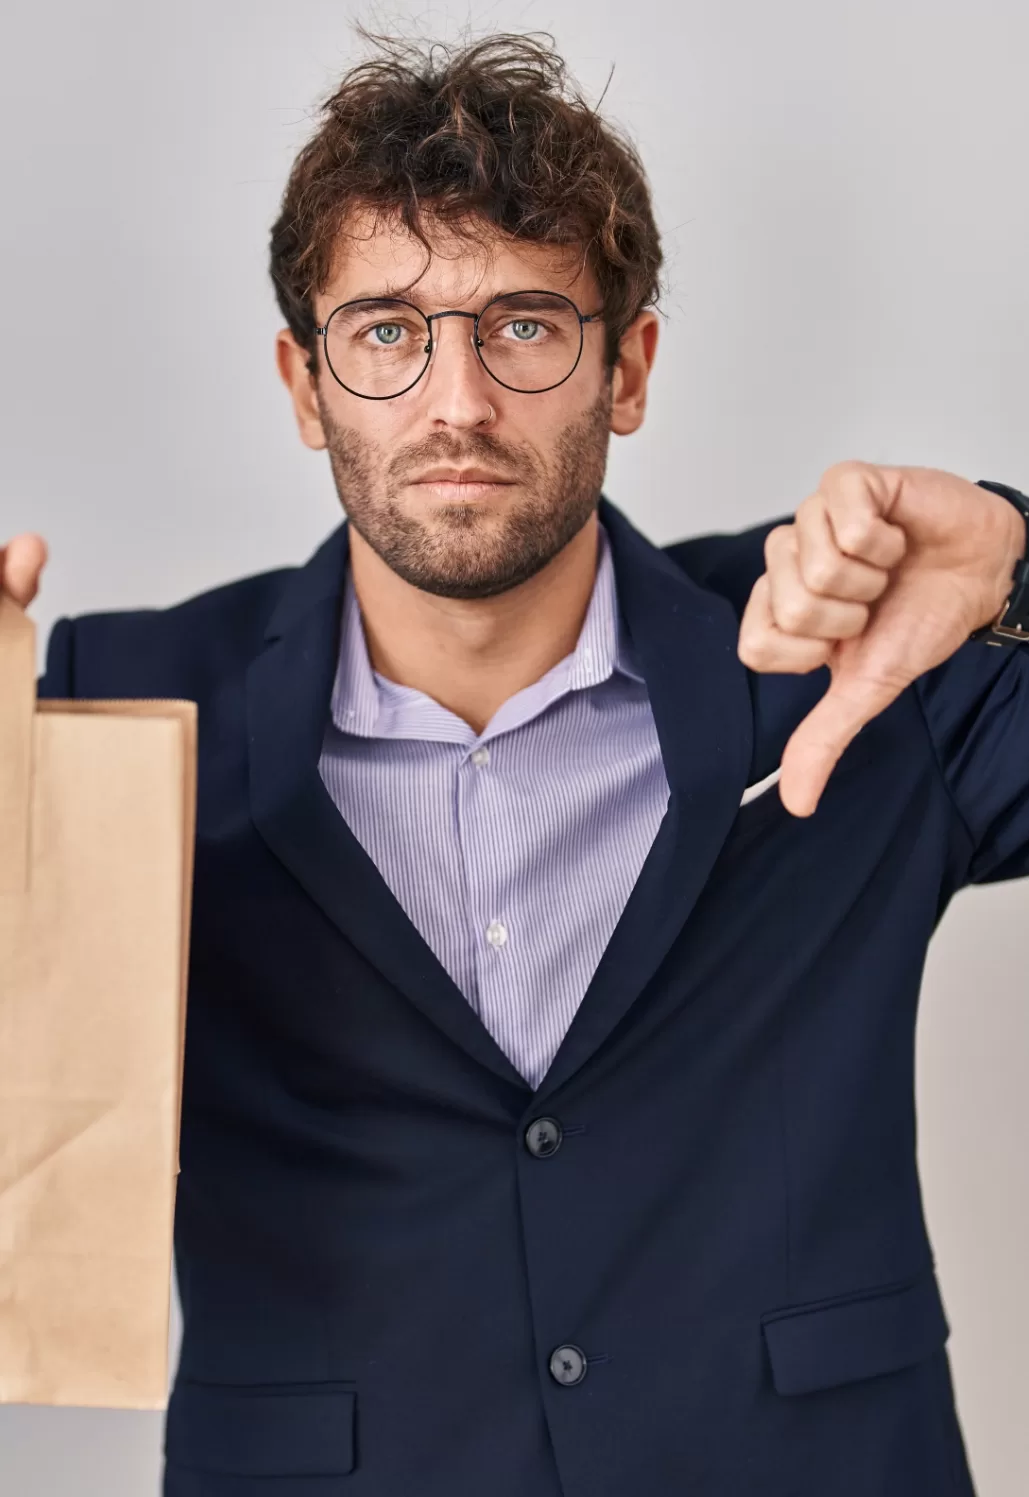 hispanic-business-man-holding-delivery-bag-with-angry-face-negative-sign-showing-dislike-with-thumbs-down-rejection-concept